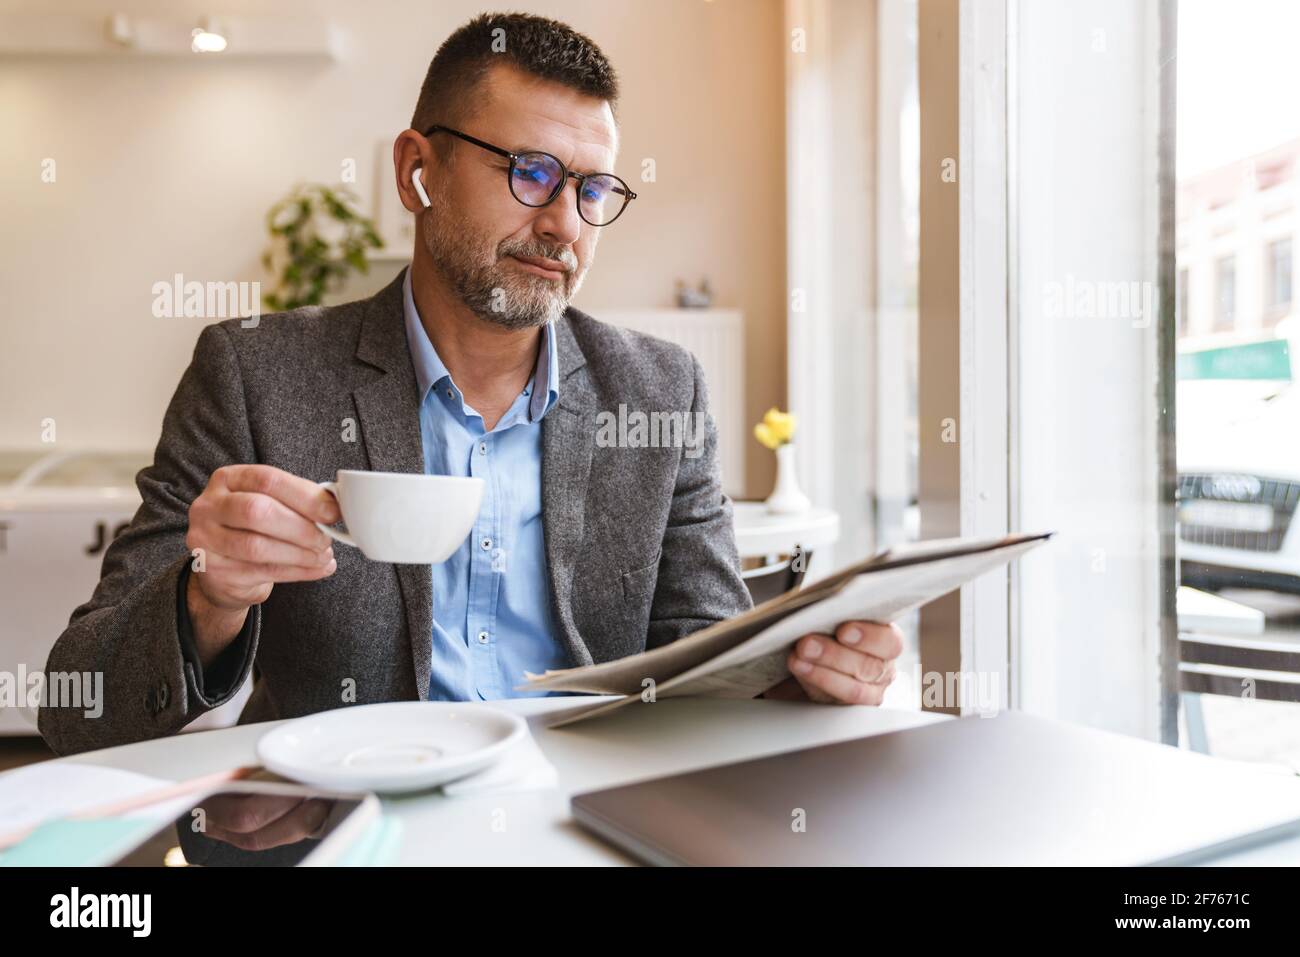 Handsome confident businessman reading newspaper and drinking coffee in cafe indoors, wearing earphones Stock Photo